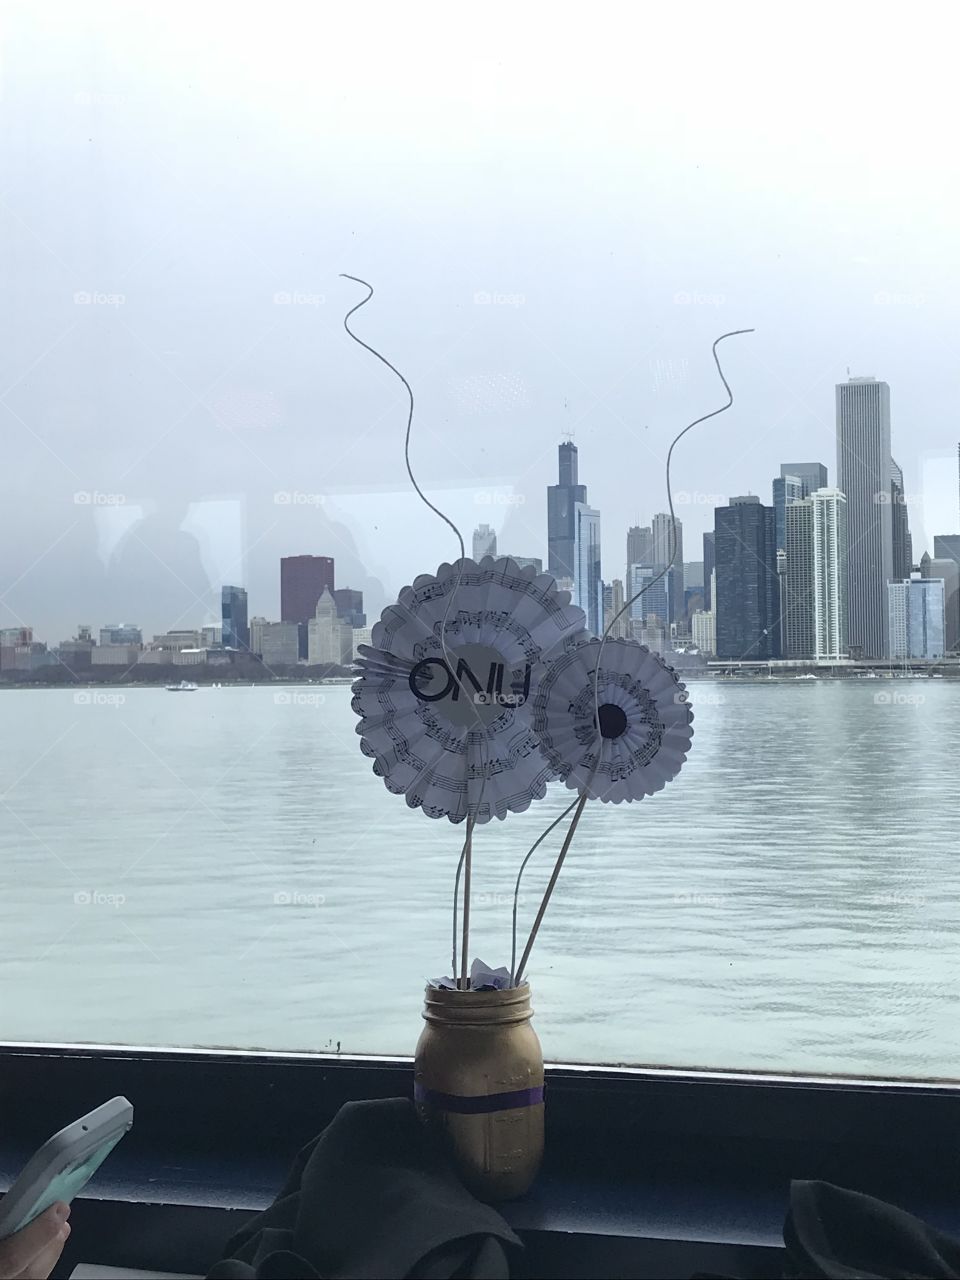 Banquet centerpiece in front of the Chicago skyline